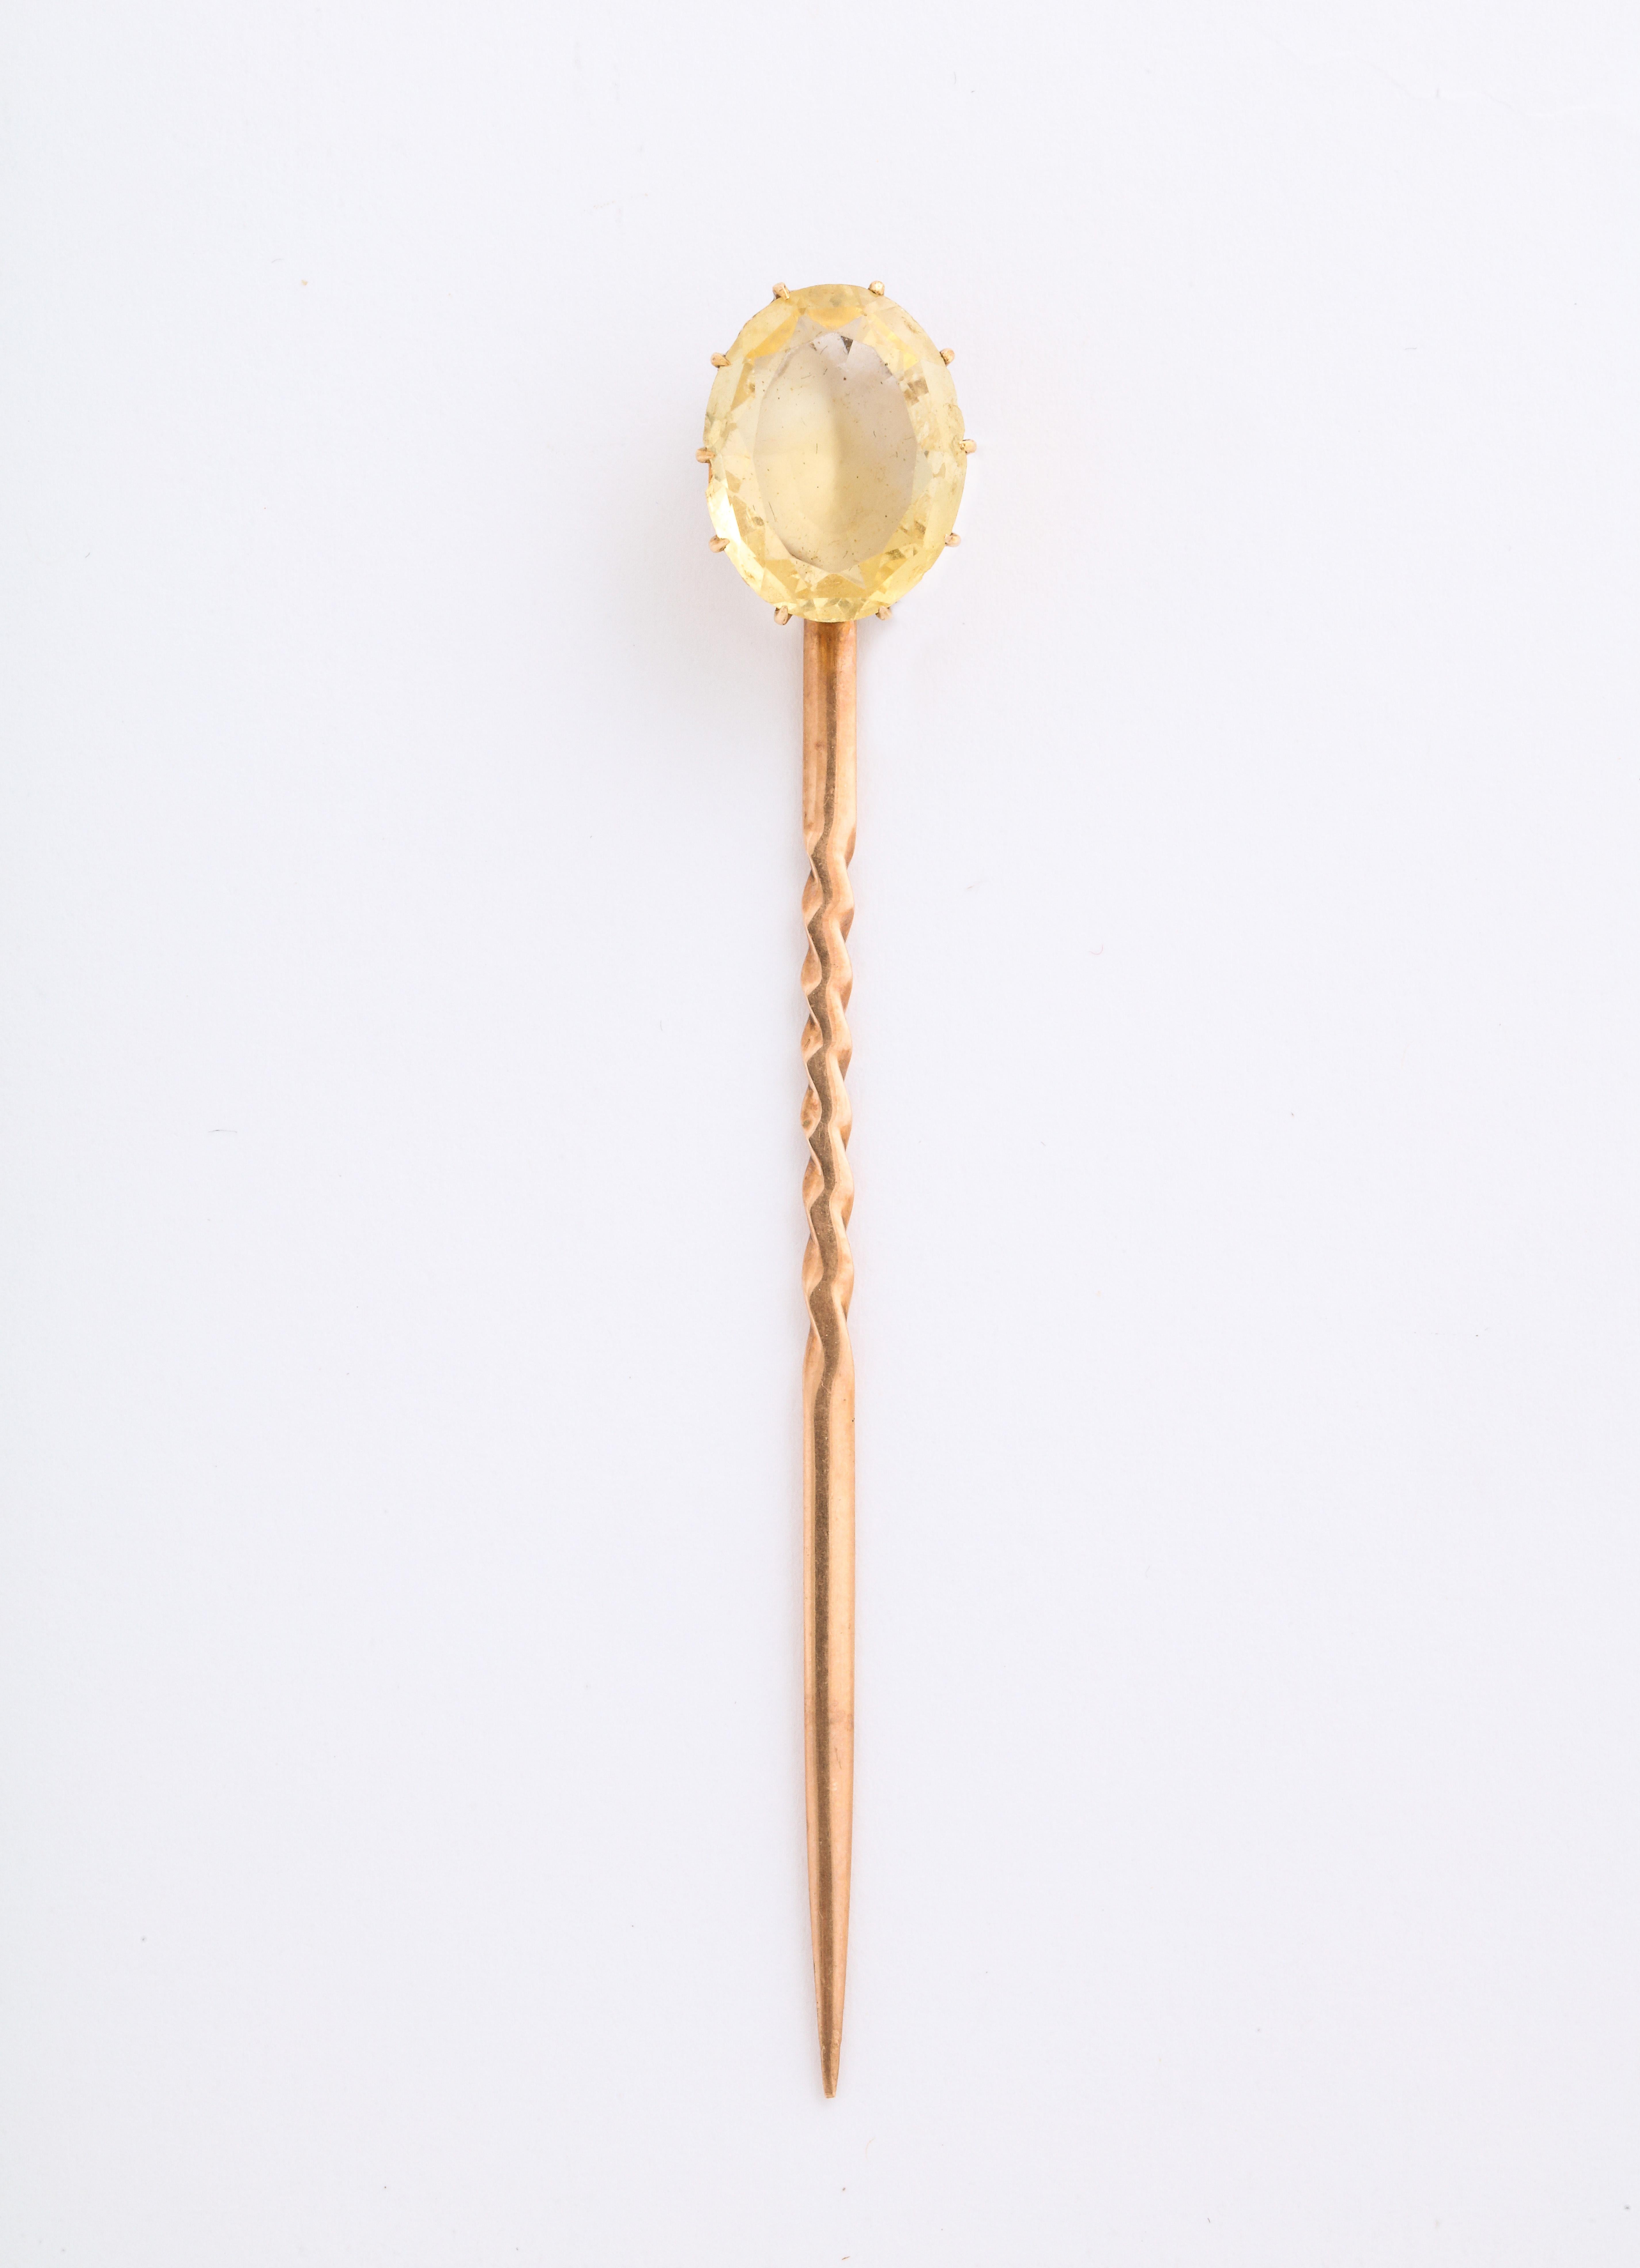 Five Carat Victorian Citrine Stickpin In Excellent Condition For Sale In Stamford, CT